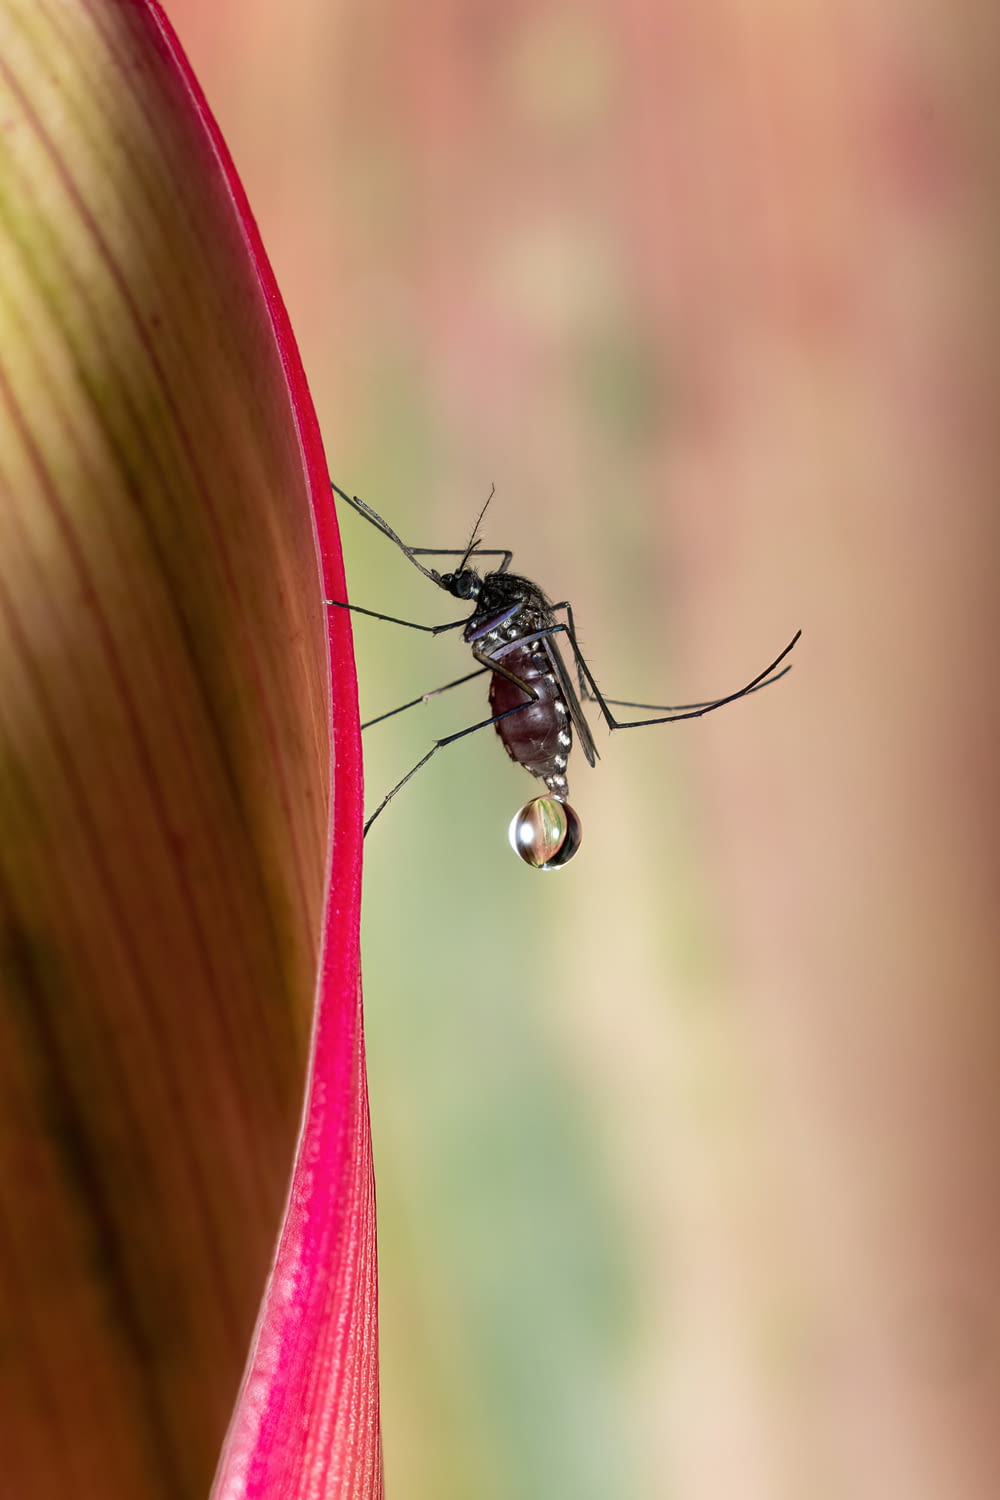 a close up of a mosquito on a flower